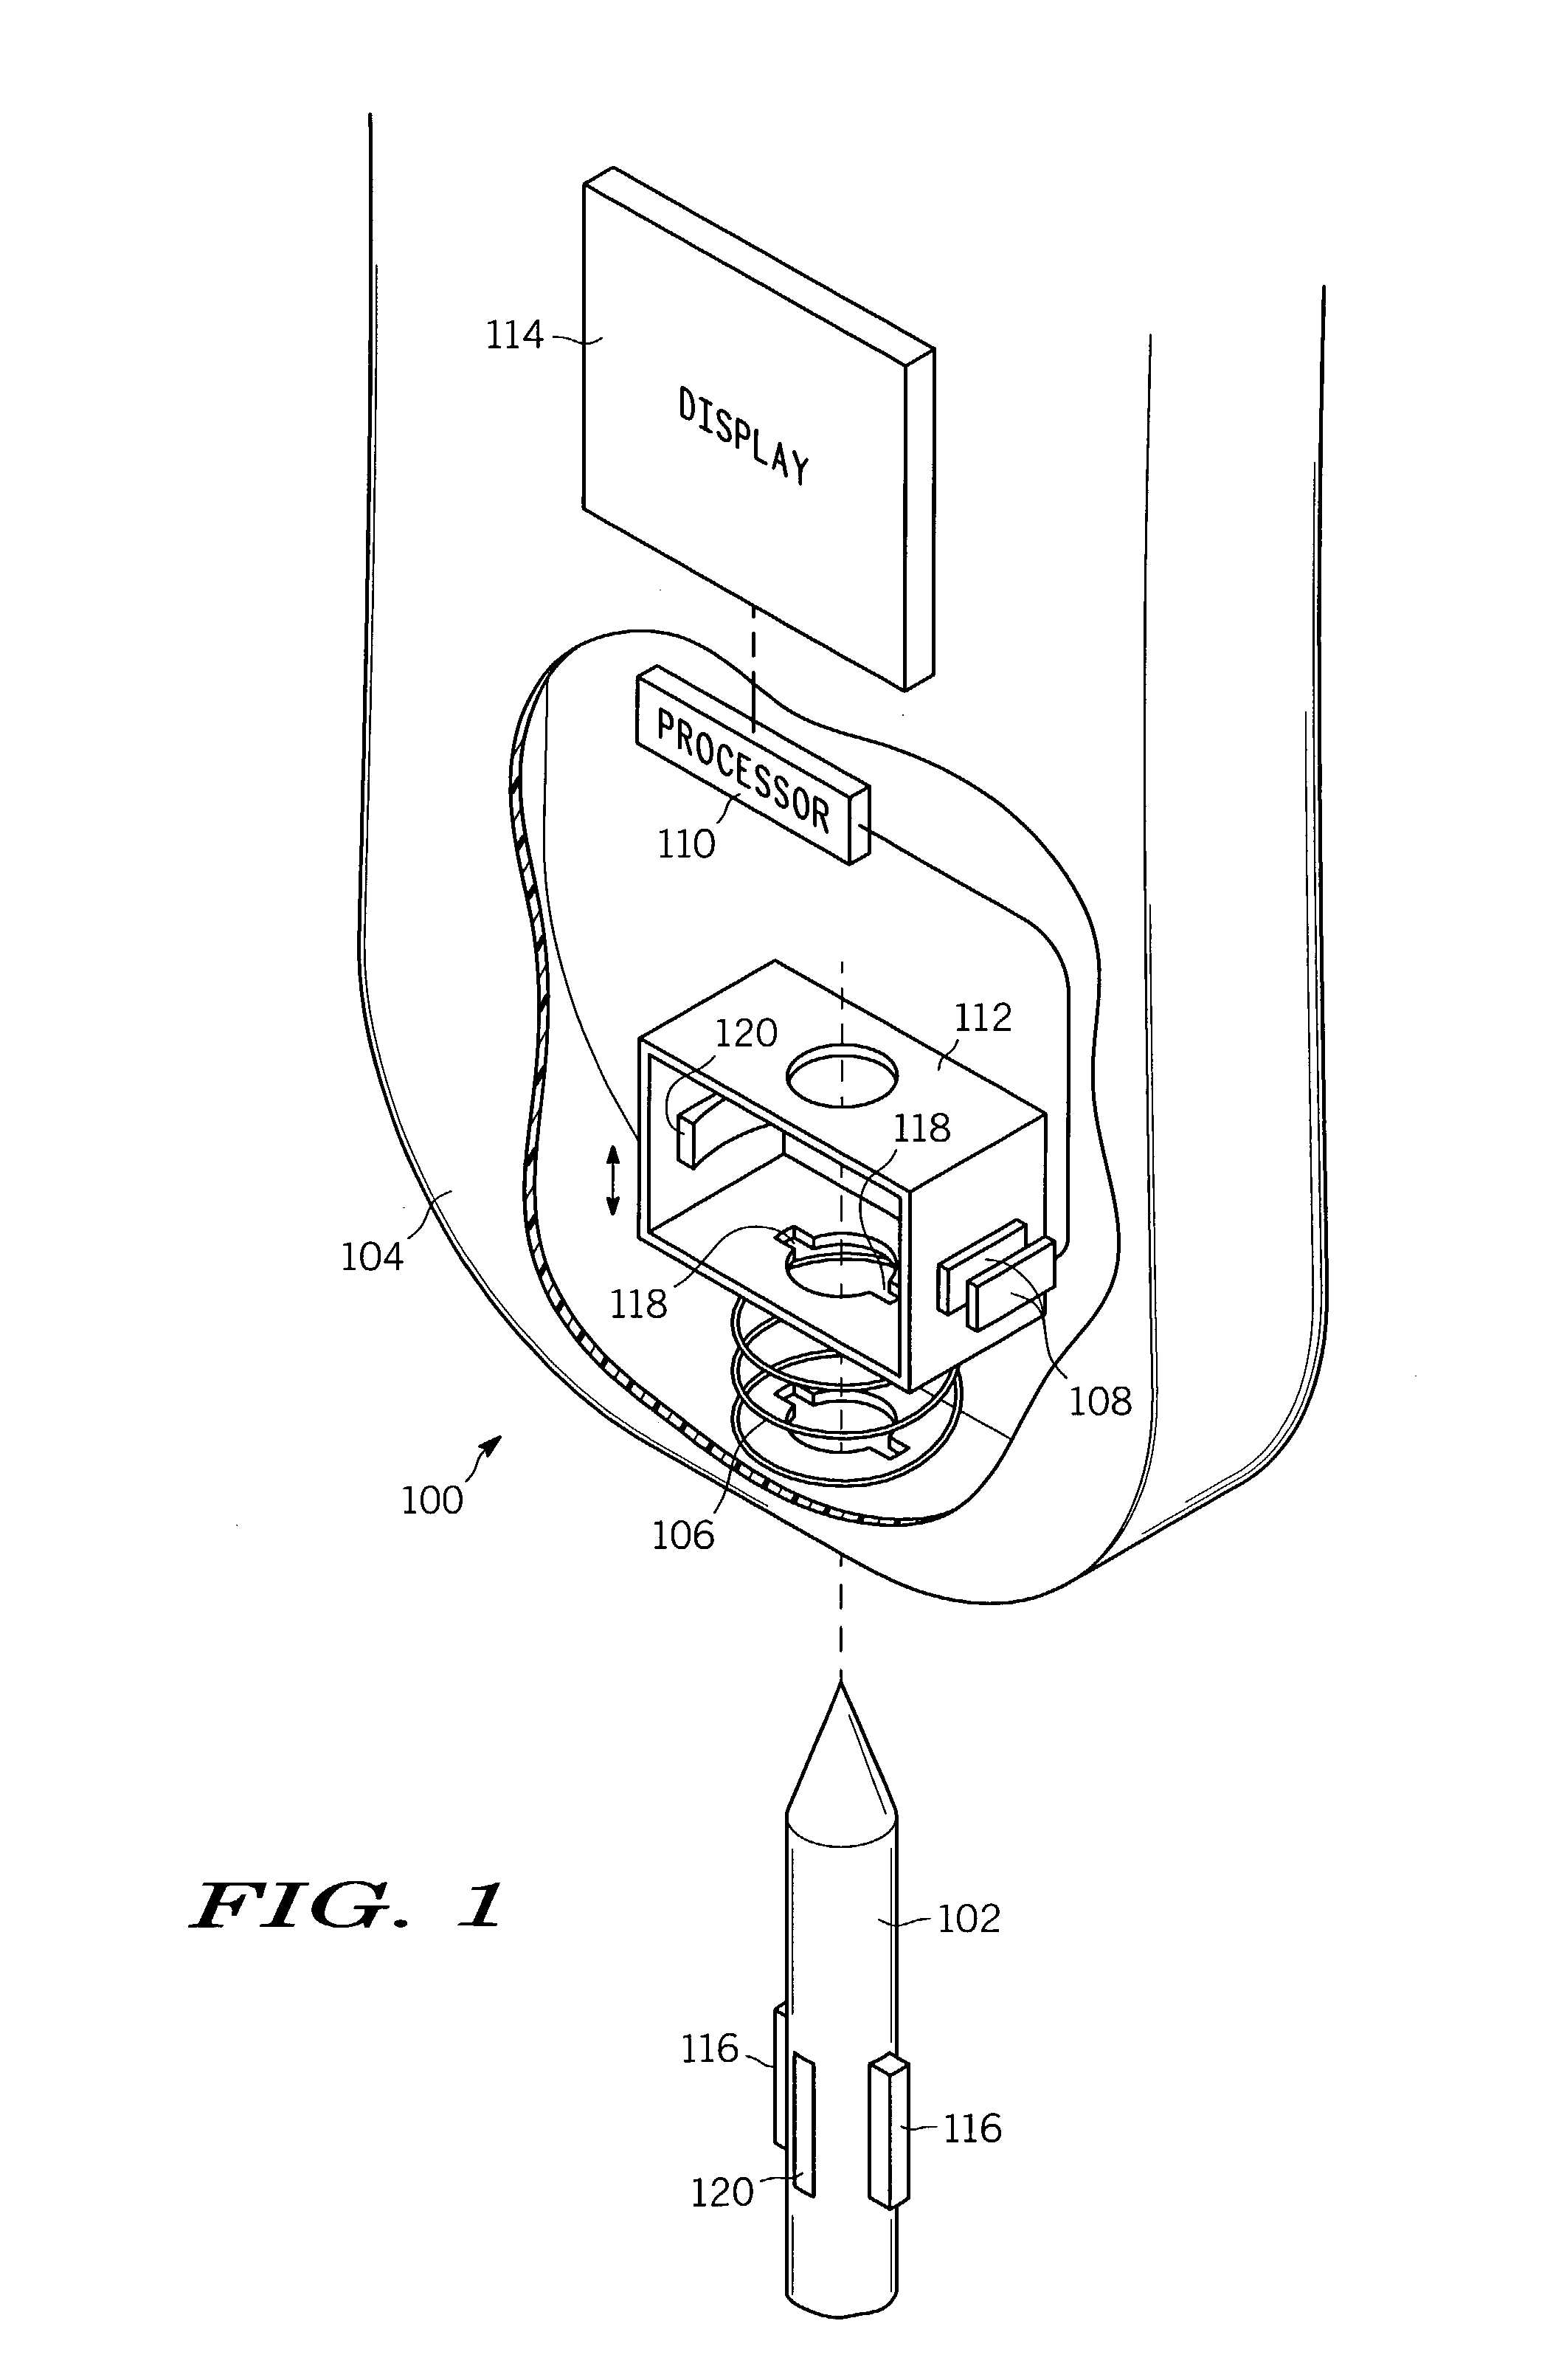 Proportional force input apparatus for an electronic device